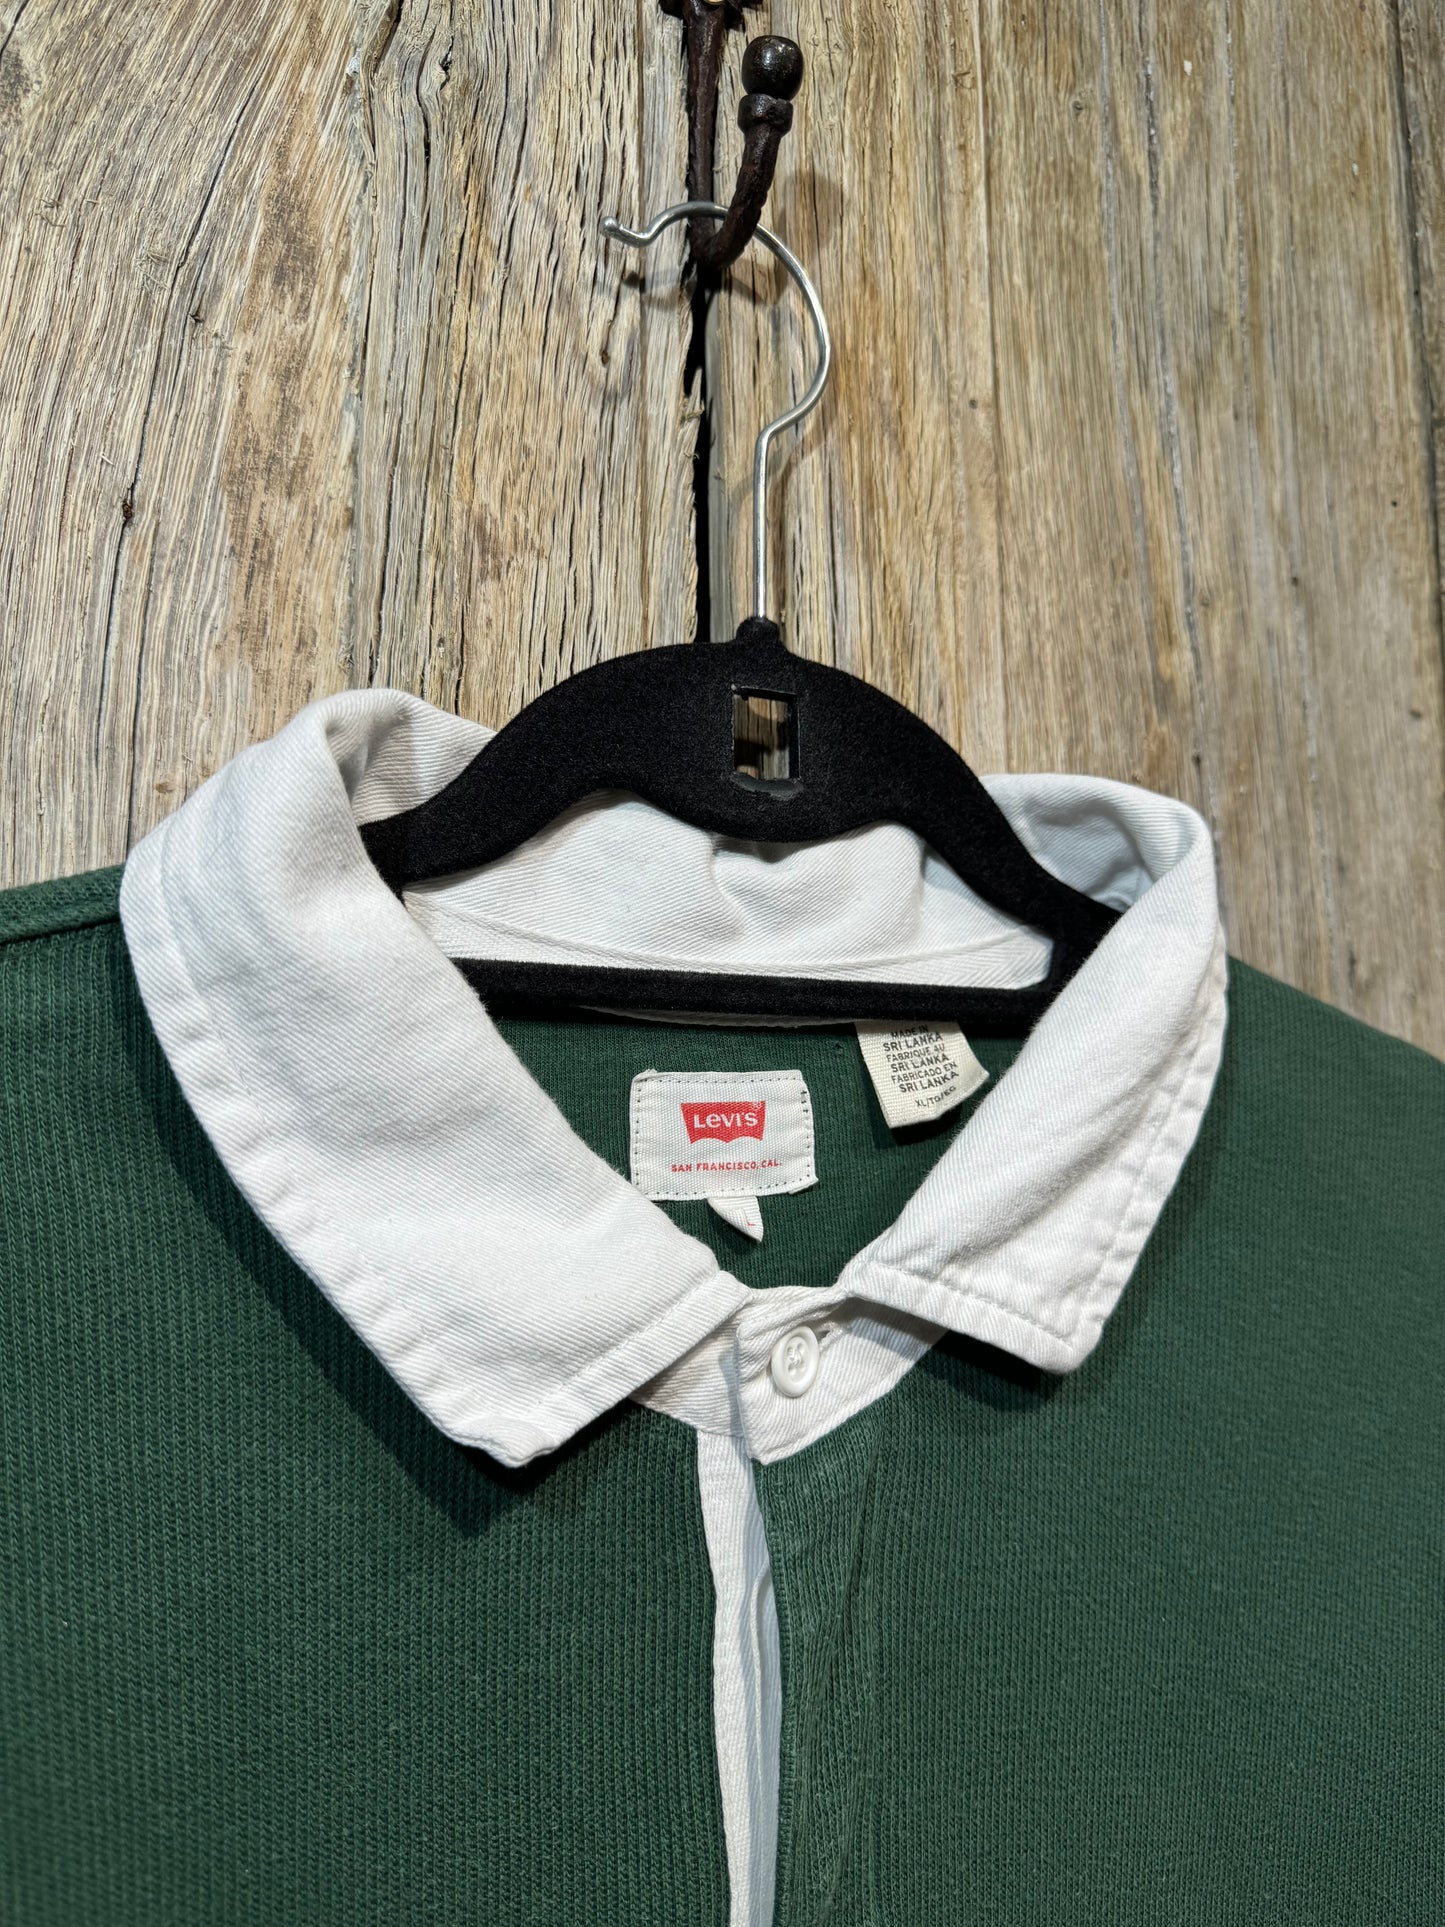 Levi’s Green Packers Rugby Shirt